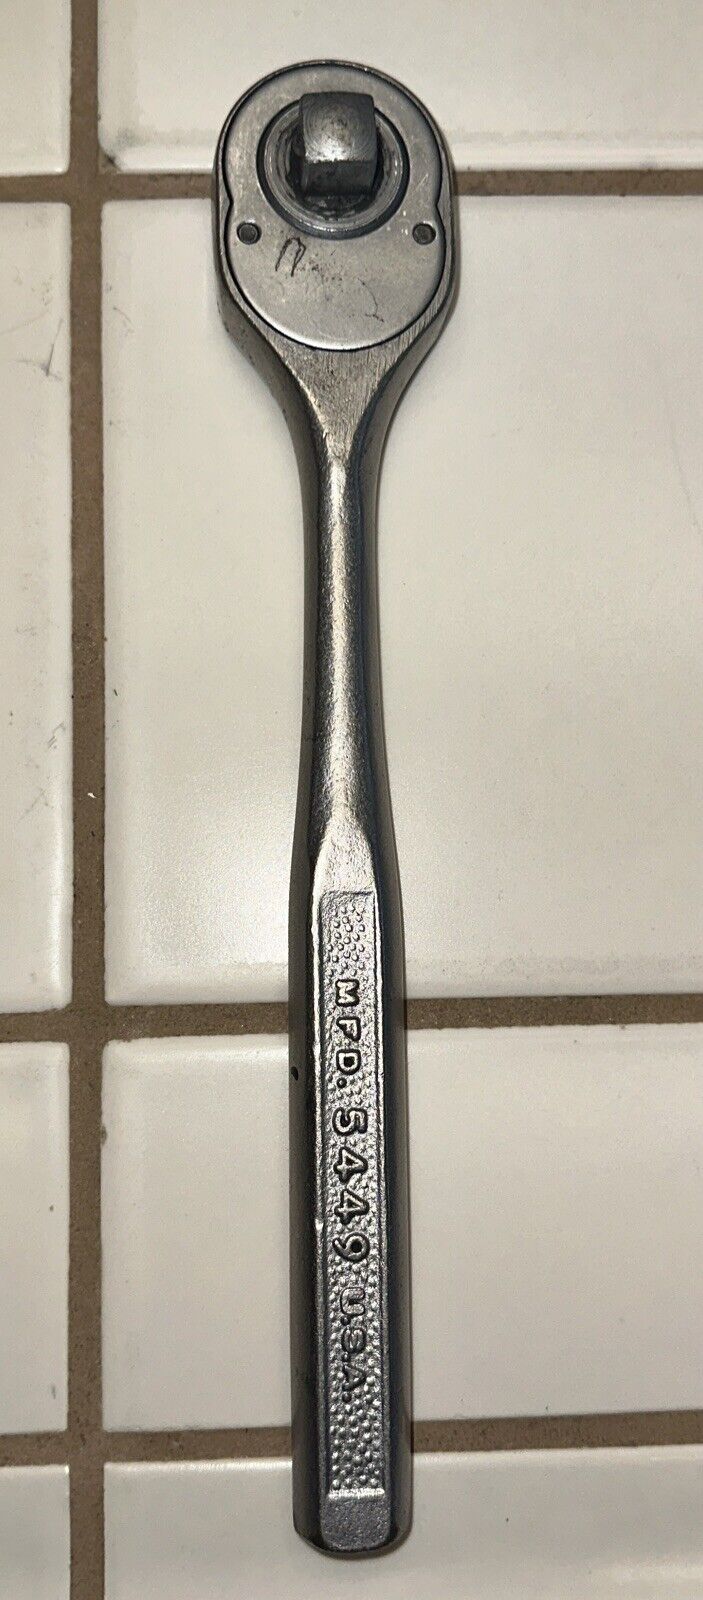 Vintage 1/2-inch Drive PLOMB PLVMB 5449 Pebble Finish Ratchet Wrench USA